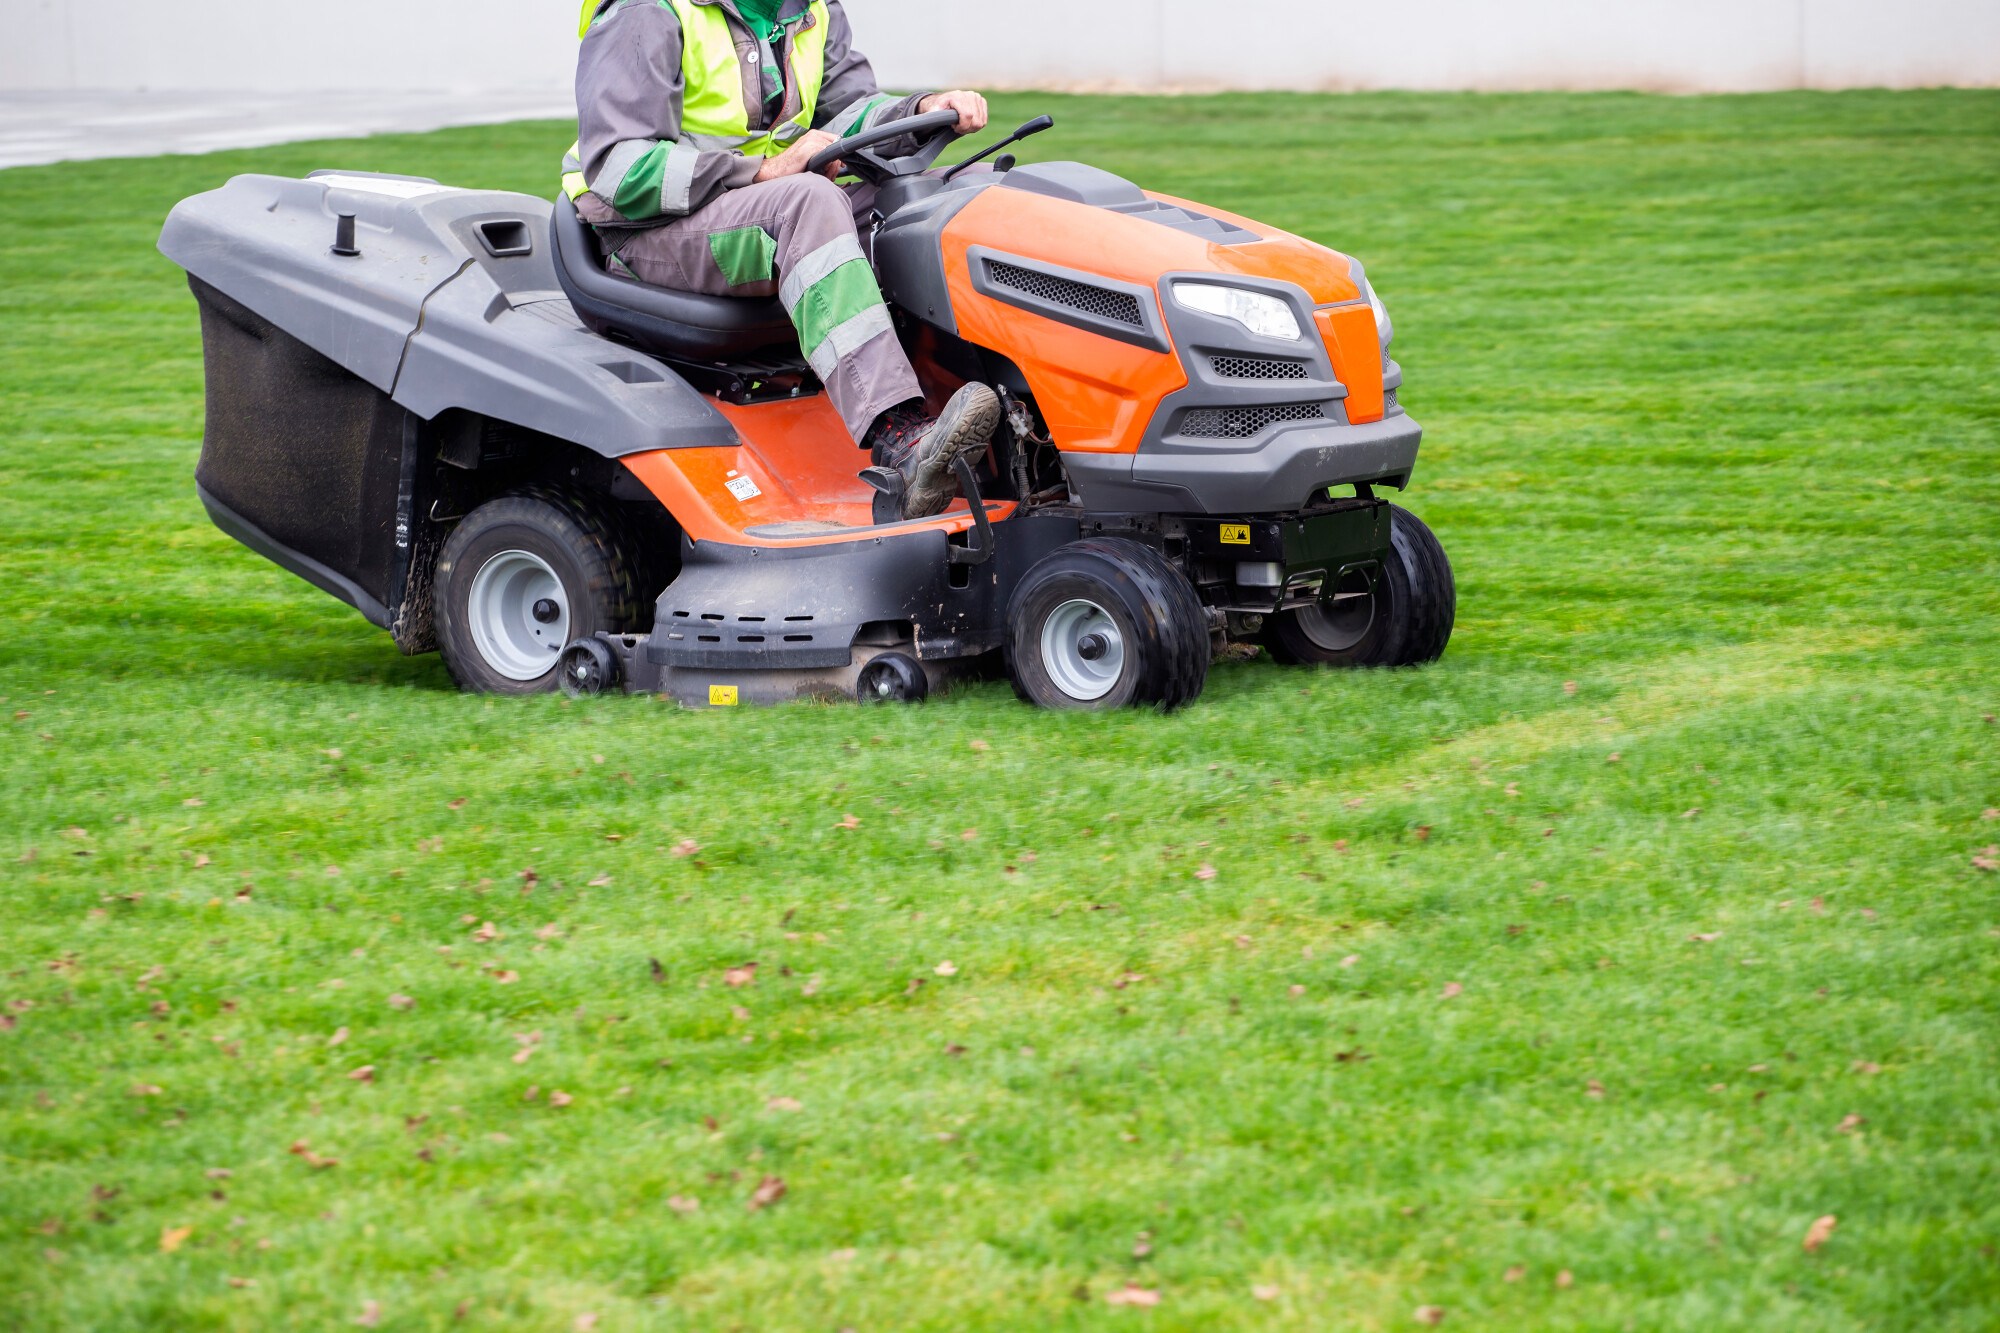 When you want to boost your curb appeal with a lush, green lawn you can enjoy all summer, explore the benefits of lawn care services.